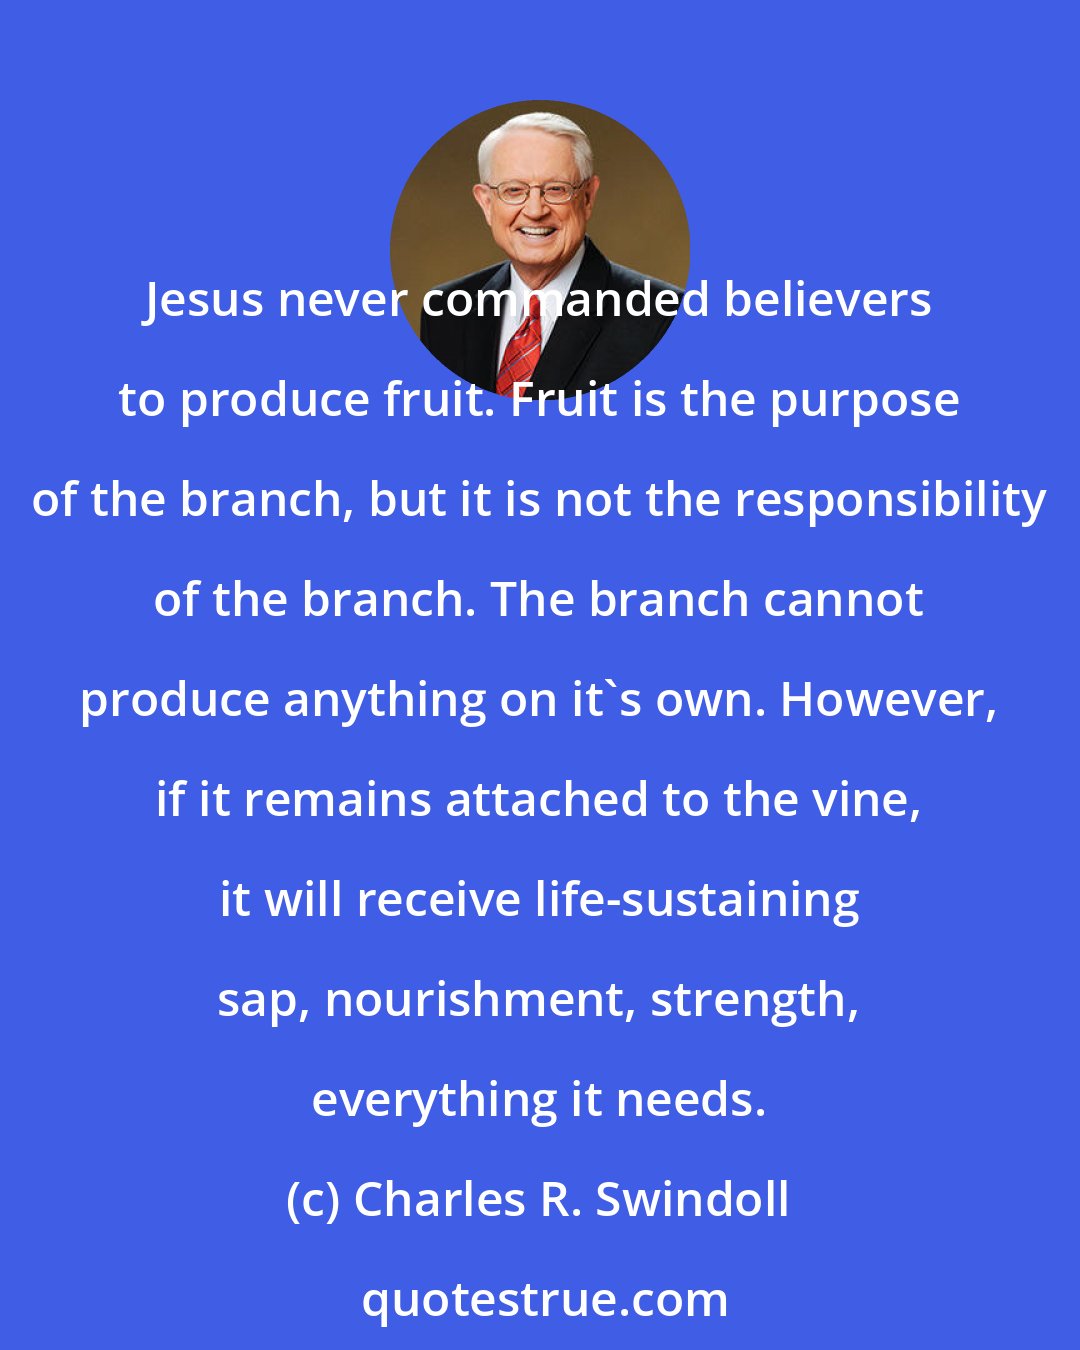 Charles R. Swindoll: Jesus never commanded believers to produce fruit. Fruit is the purpose of the branch, but it is not the responsibility of the branch. The branch cannot produce anything on it's own. However, if it remains attached to the vine, it will receive life-sustaining sap, nourishment, strength, everything it needs.